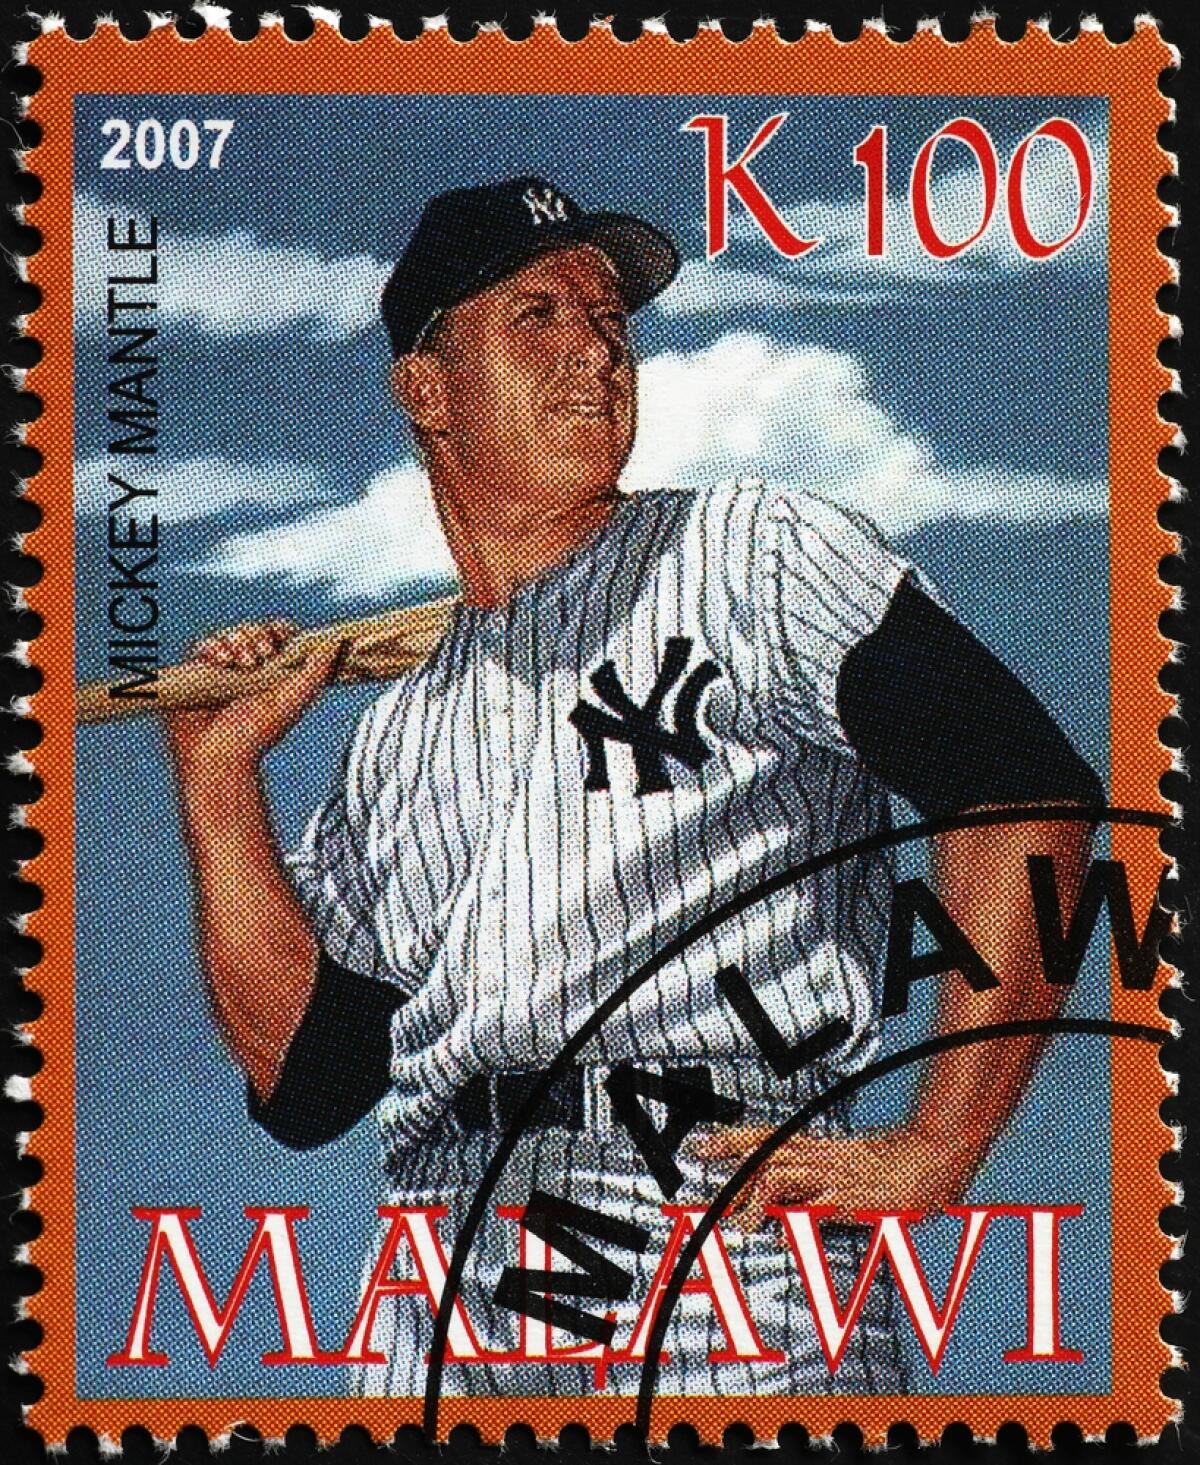 Most Valuable Sports Cards of All Time